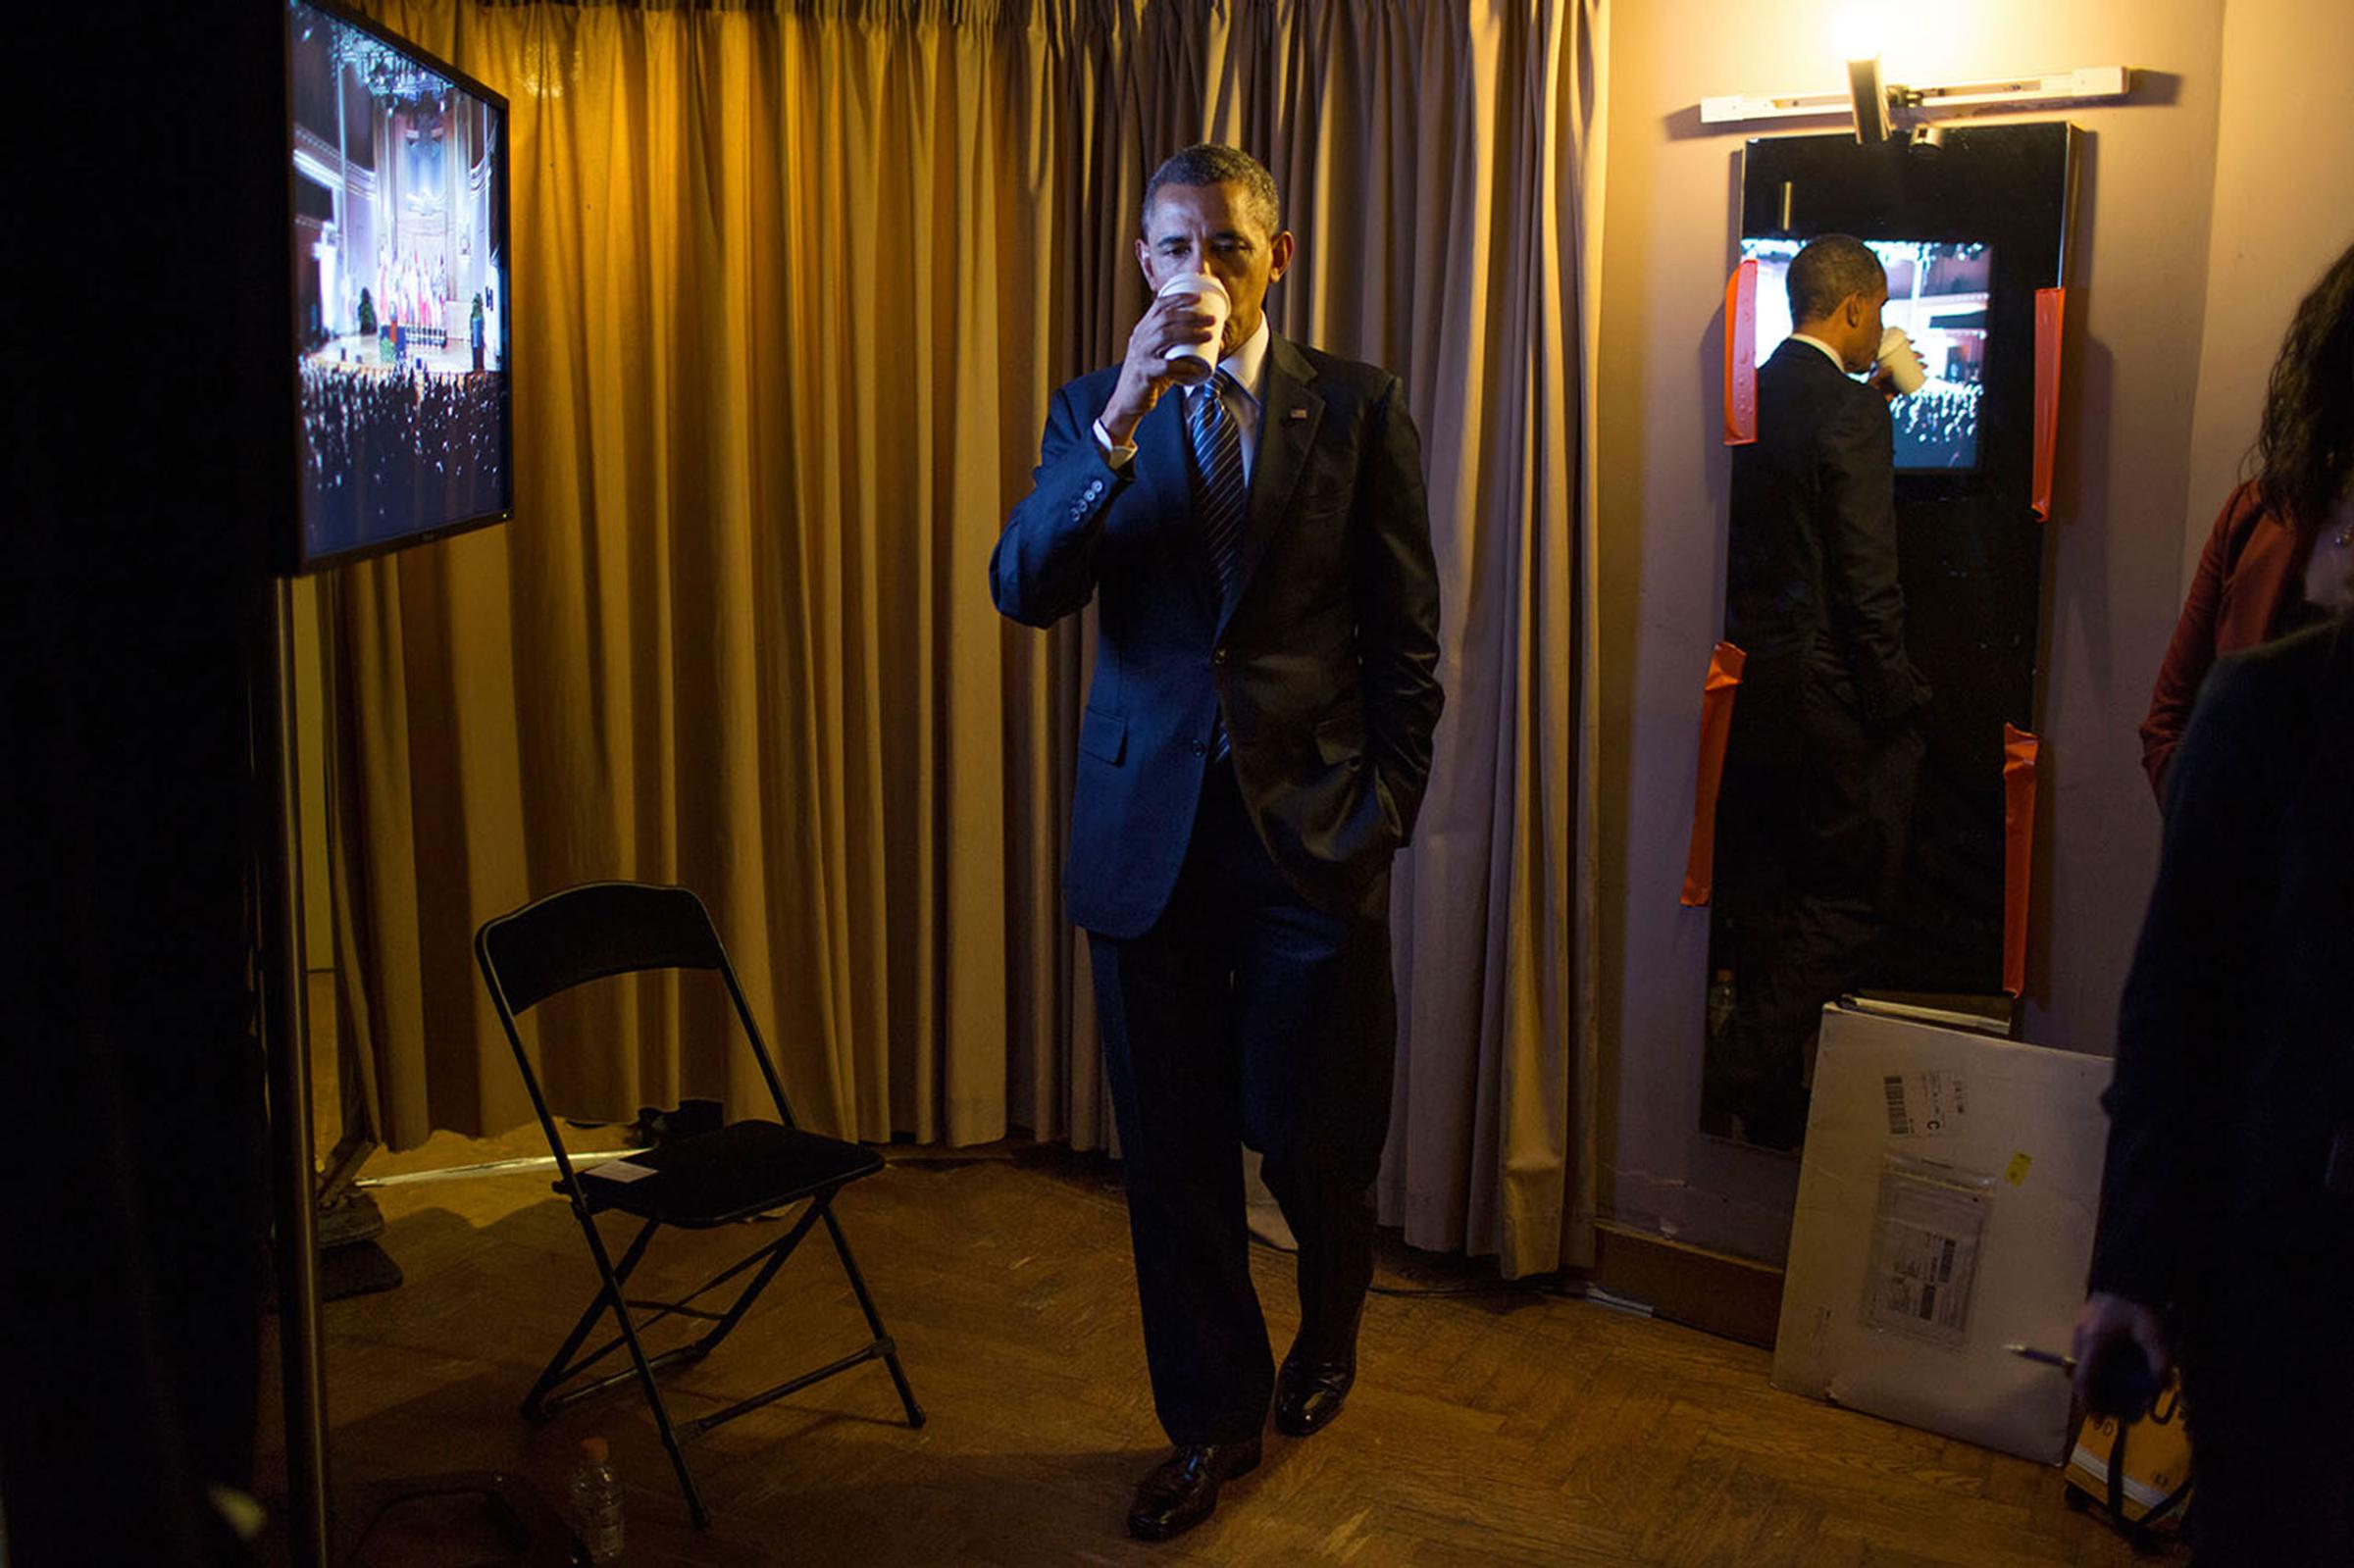 President Barack Obama sips hot tea backstage before he delivers remarks at the Palais Des Beaux Arts in Brussels, Belgium, March 26, 2014.